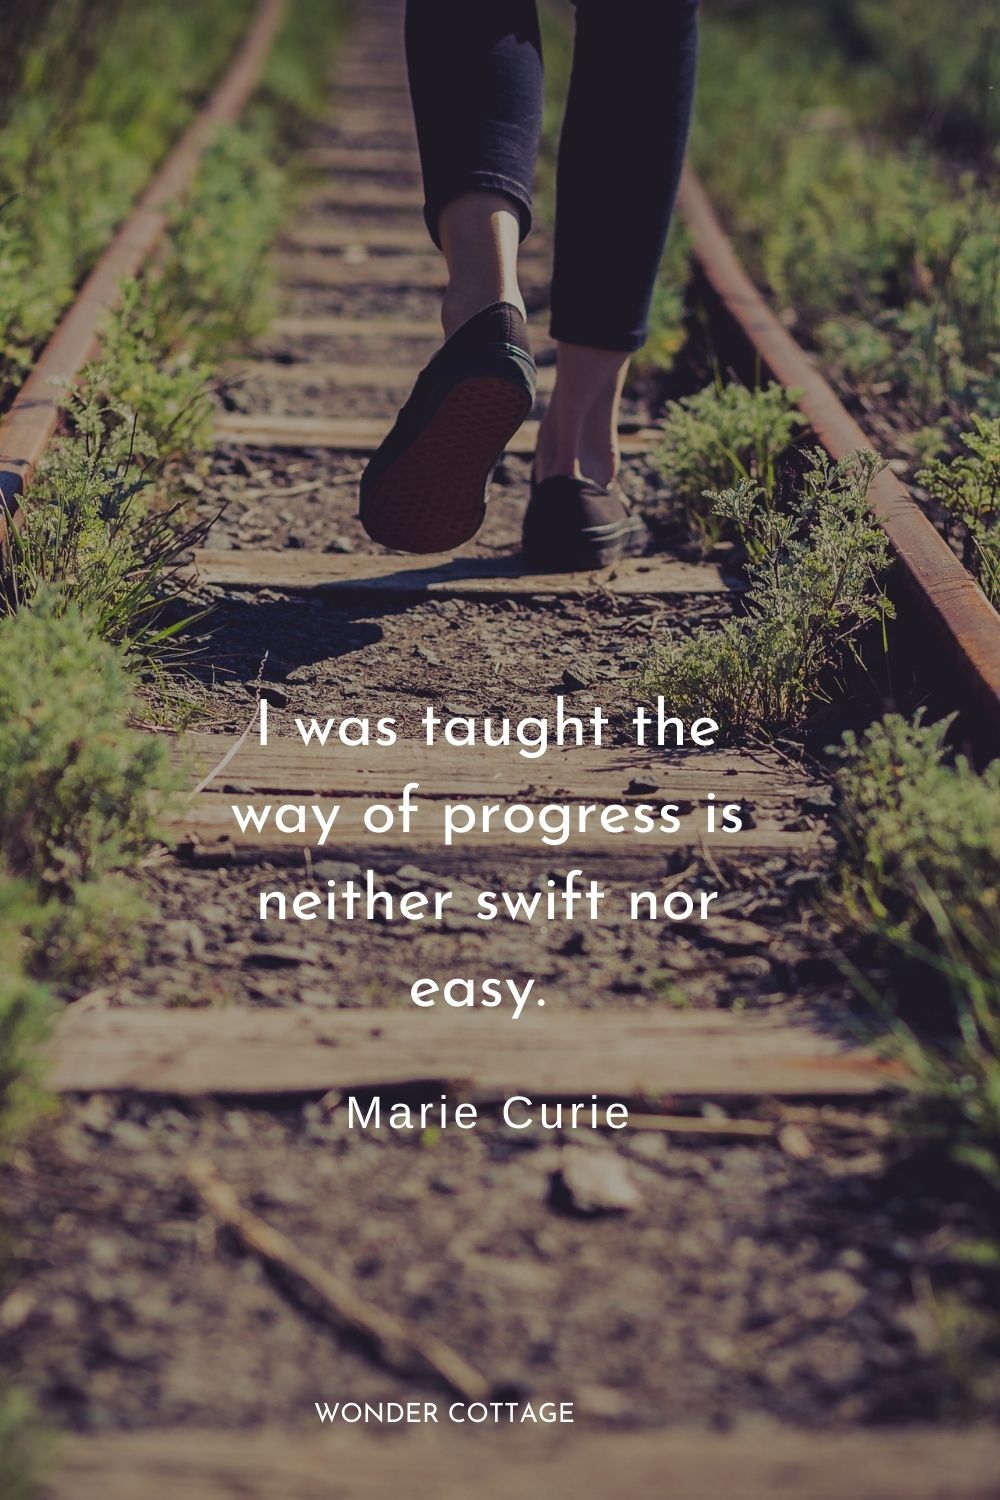 I was taught the way of progress is neither swift nor easy.  Marie Curie